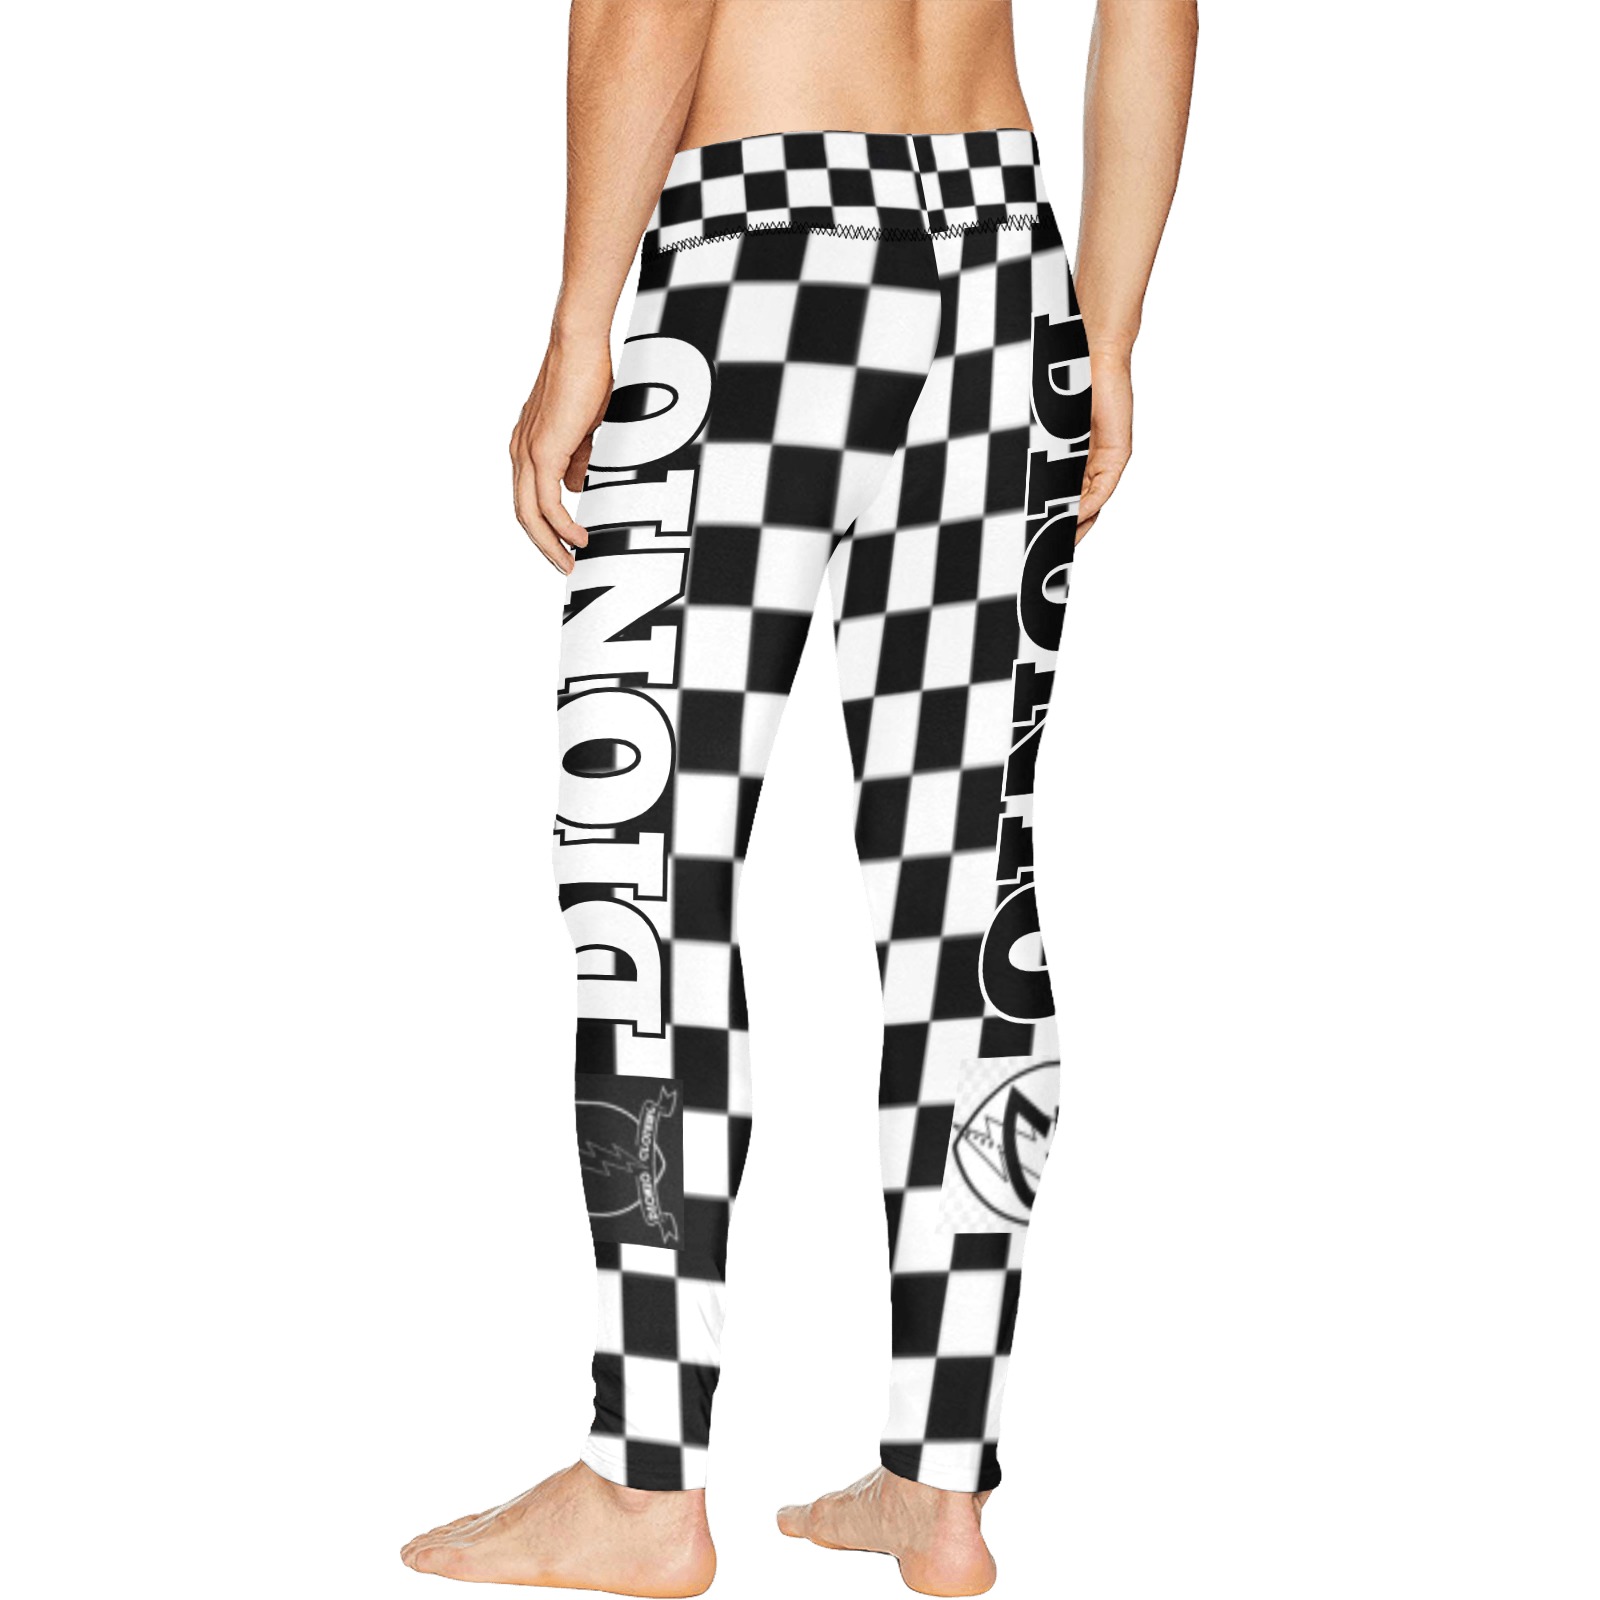 DIONIO - Men's Checkered Stretched/Workout Pants (Black & White) Men's All Over Print Leggings (Model L38)